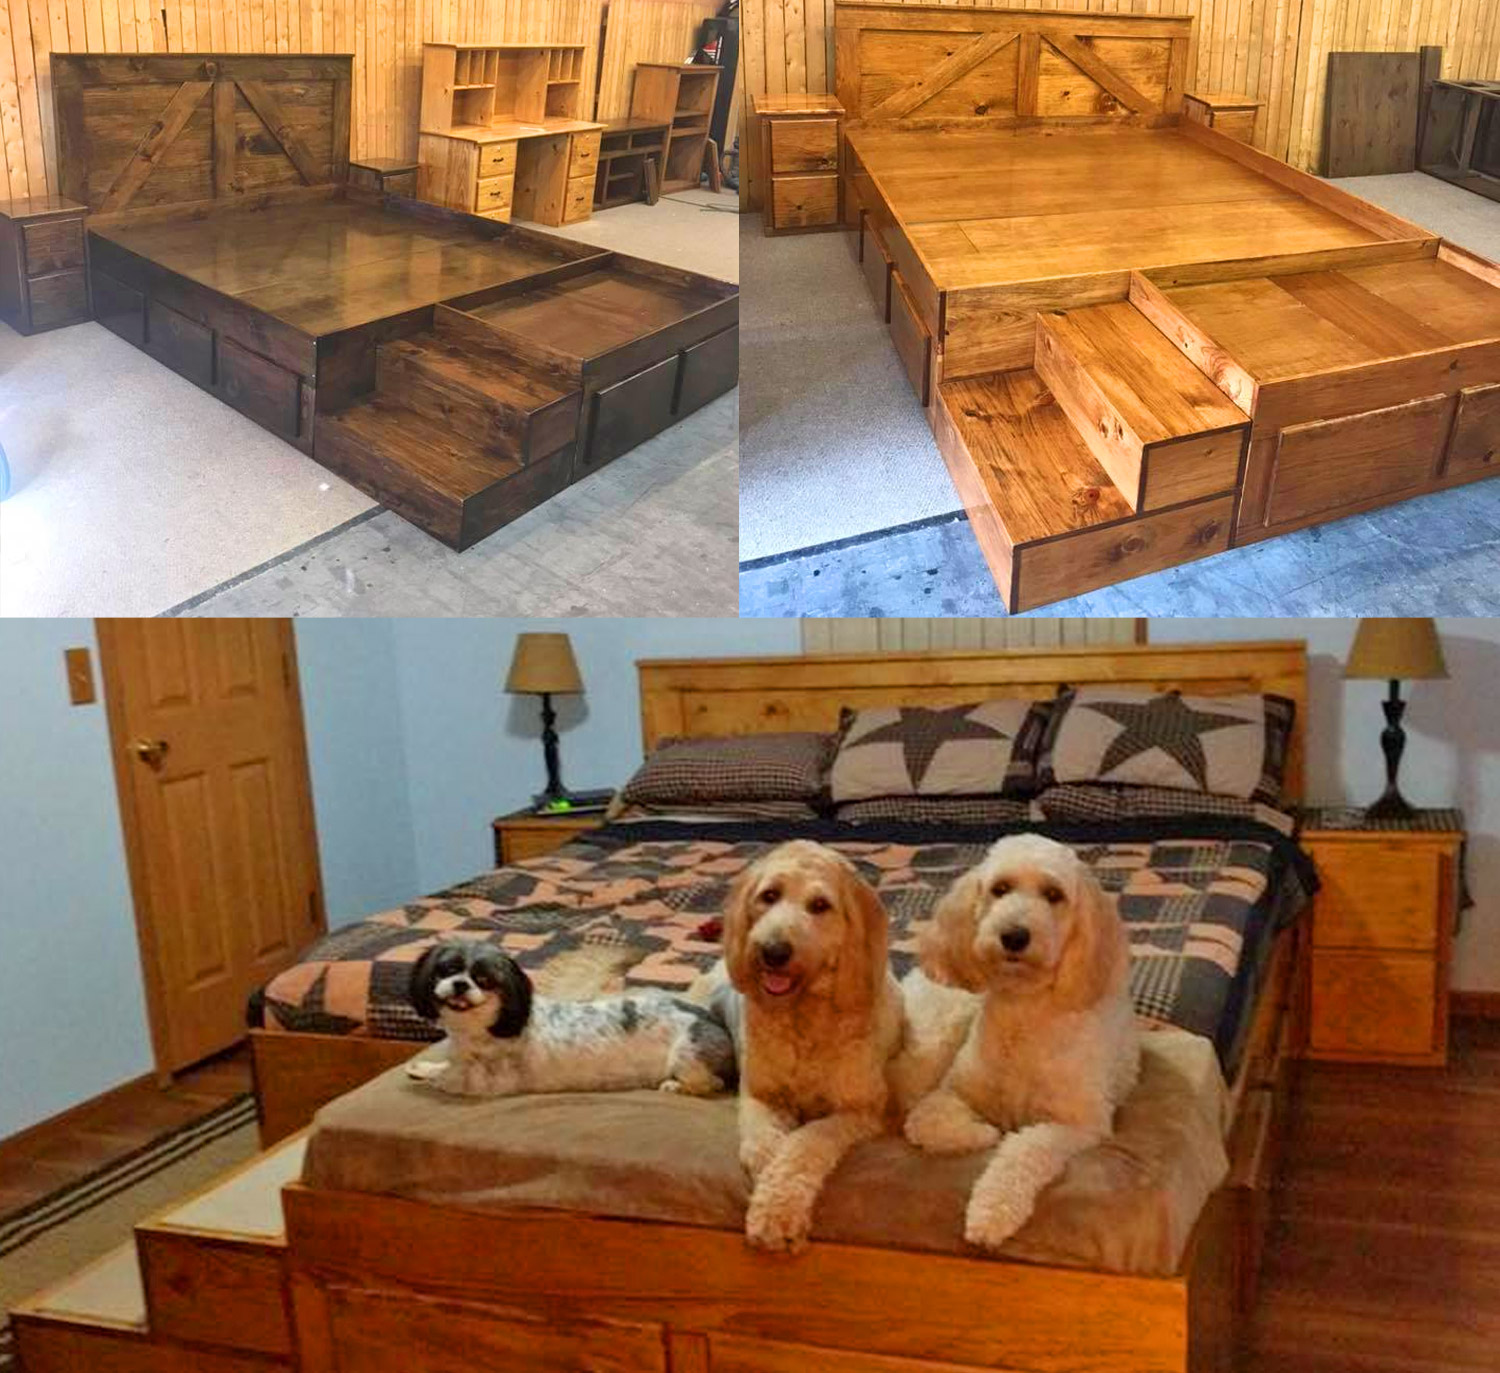 This Wooden King Bed Has Built In, King Size Bed Frame With Attached Dog